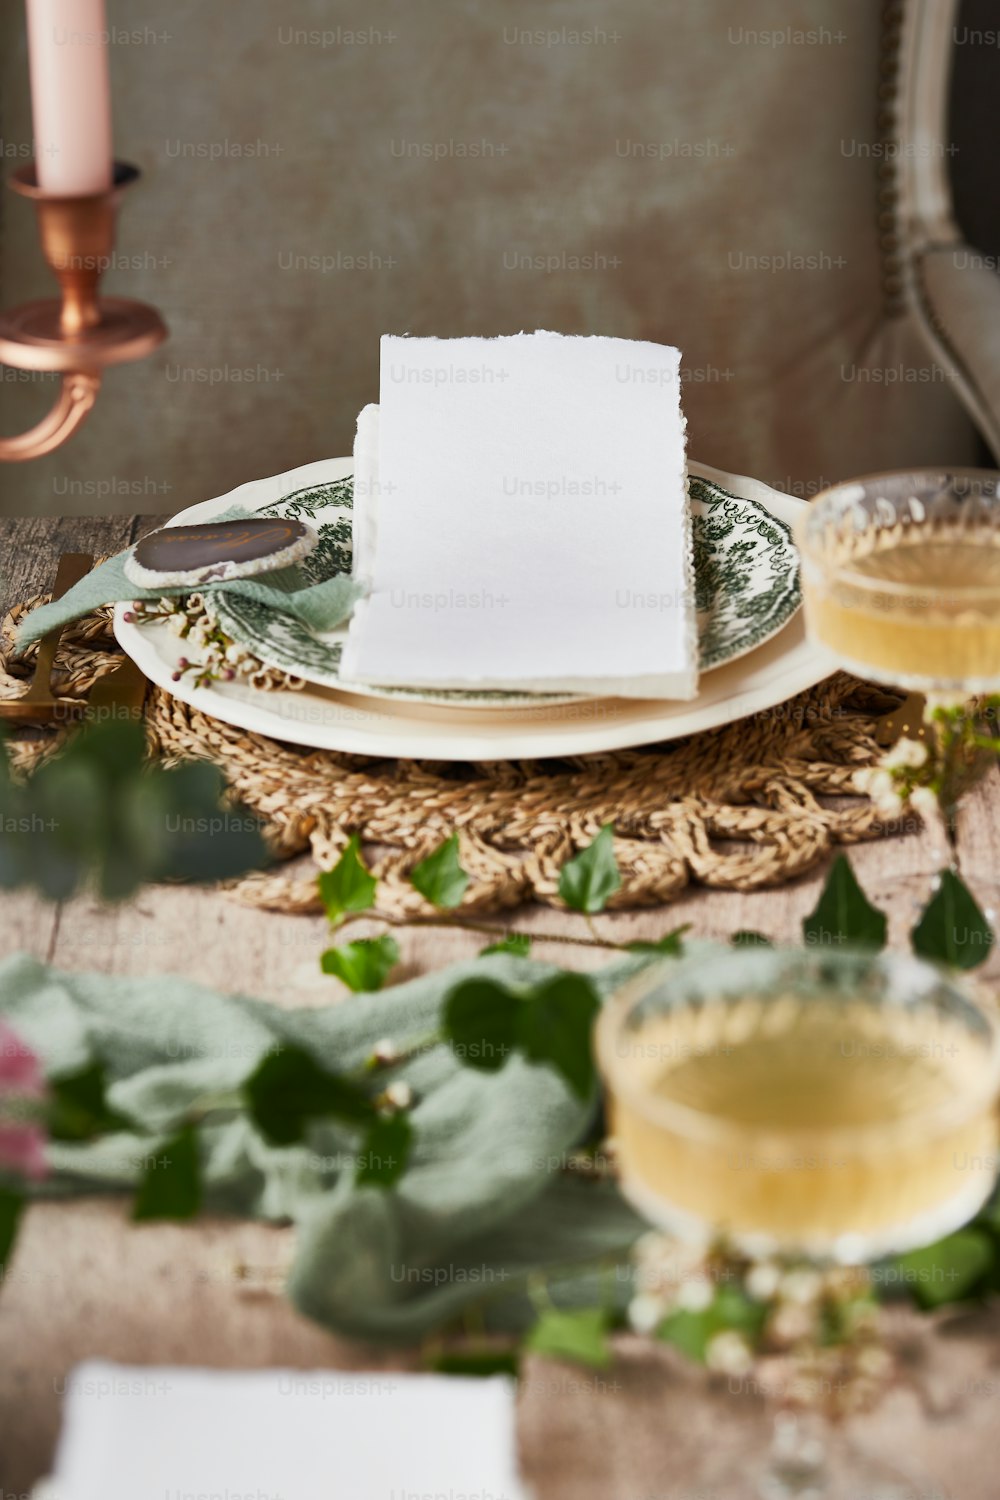 a place setting with place settings and place settings